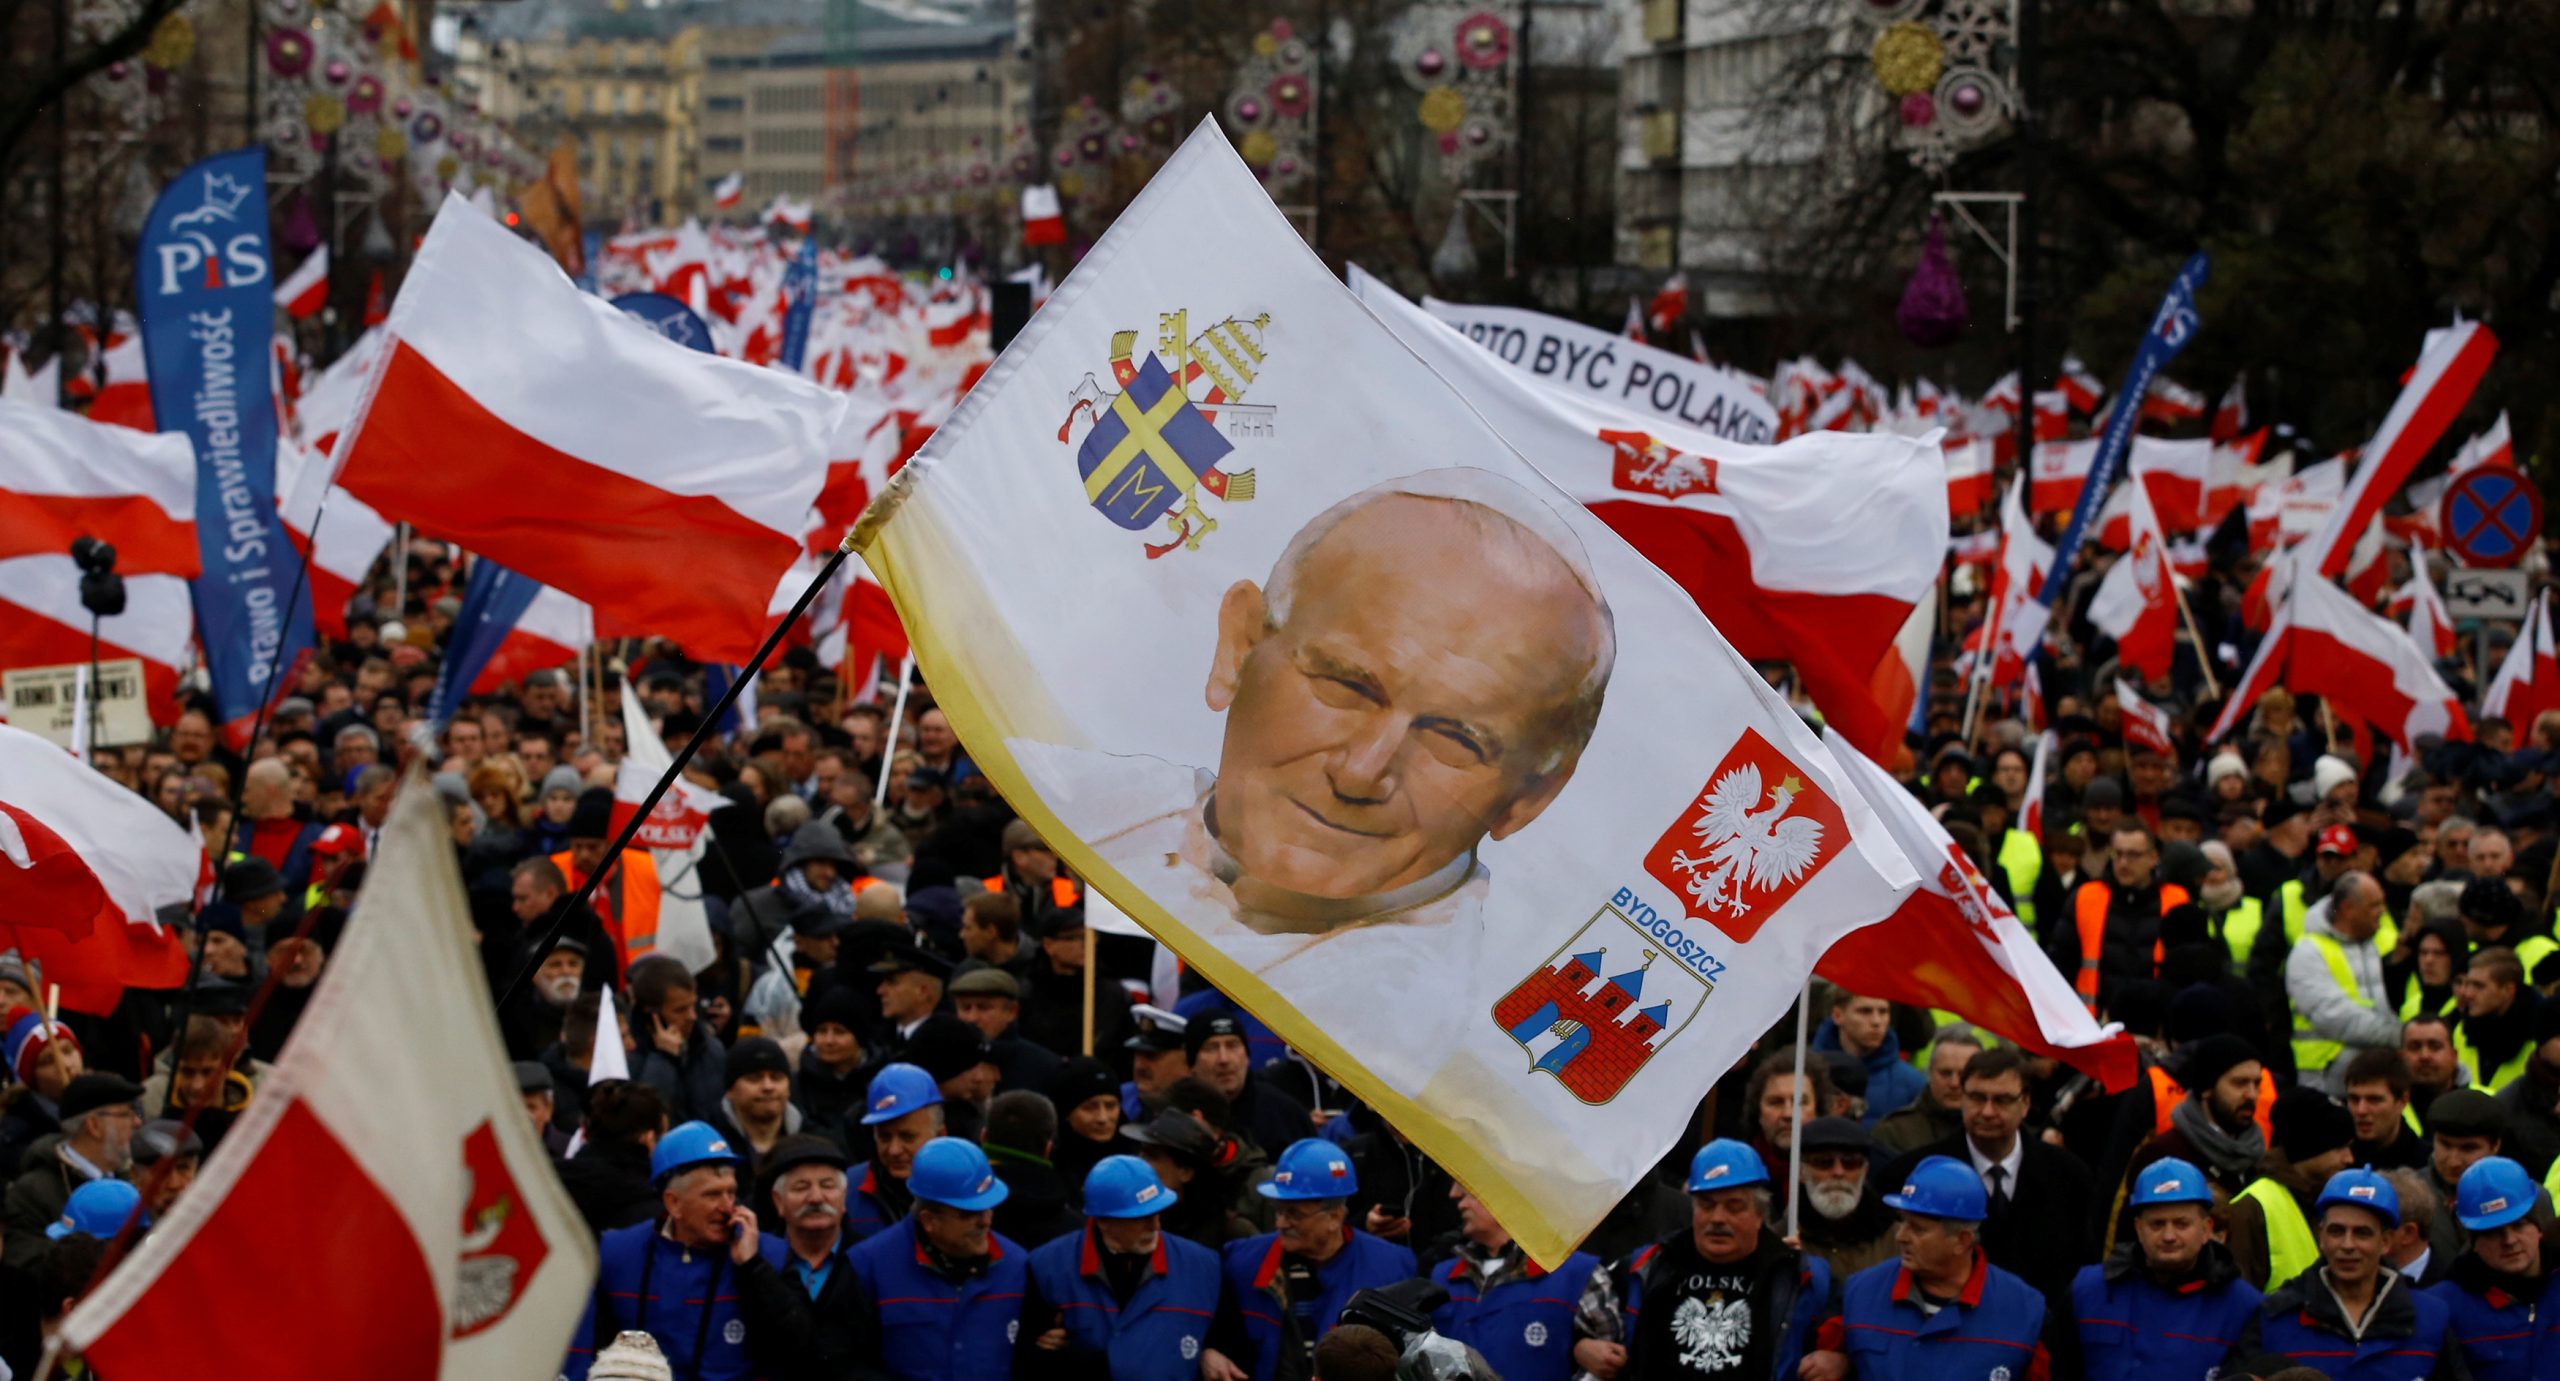 Supporters of Law and Justice party walk with a portrait of late Pope John Paul II during a pro-government demonstration in Warsaw